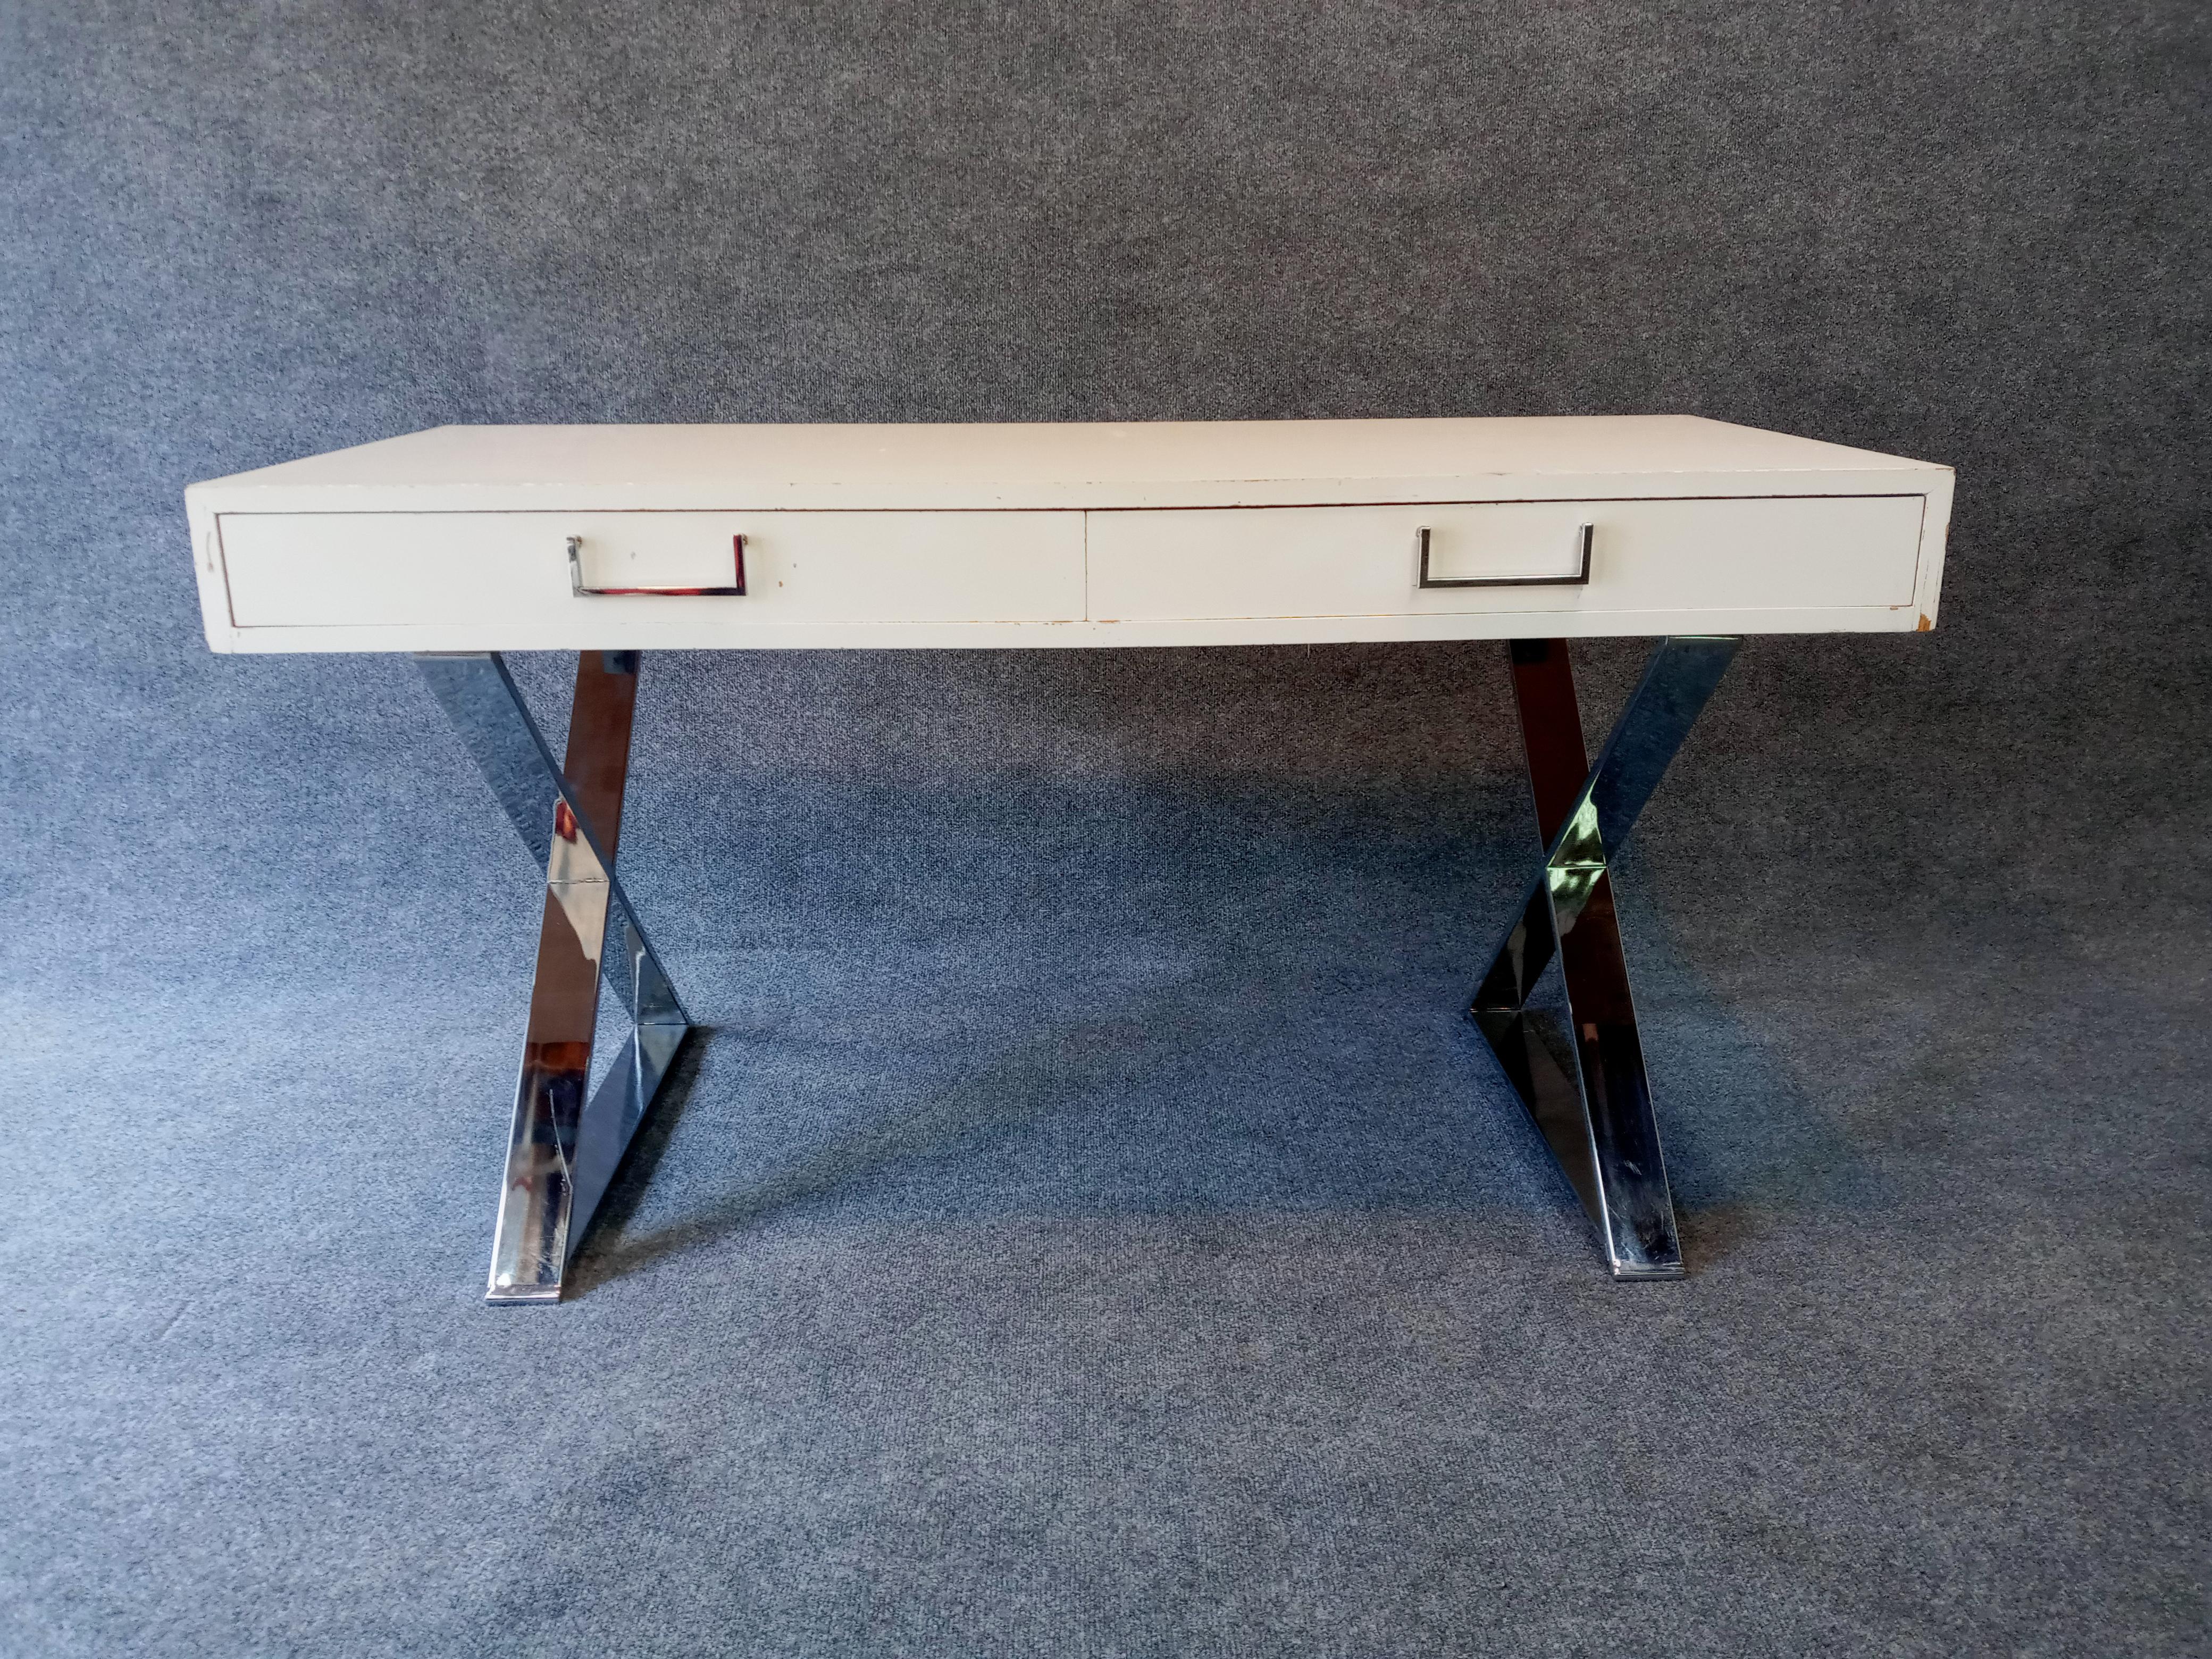 Retailed by John Stewart, heavily influenced by the designs of Milo Baughman. This modest-scale desk features two drawers and has original finishes intact. The original white enamel shows age appropriate scuffs, scratches, and signs of general wear.